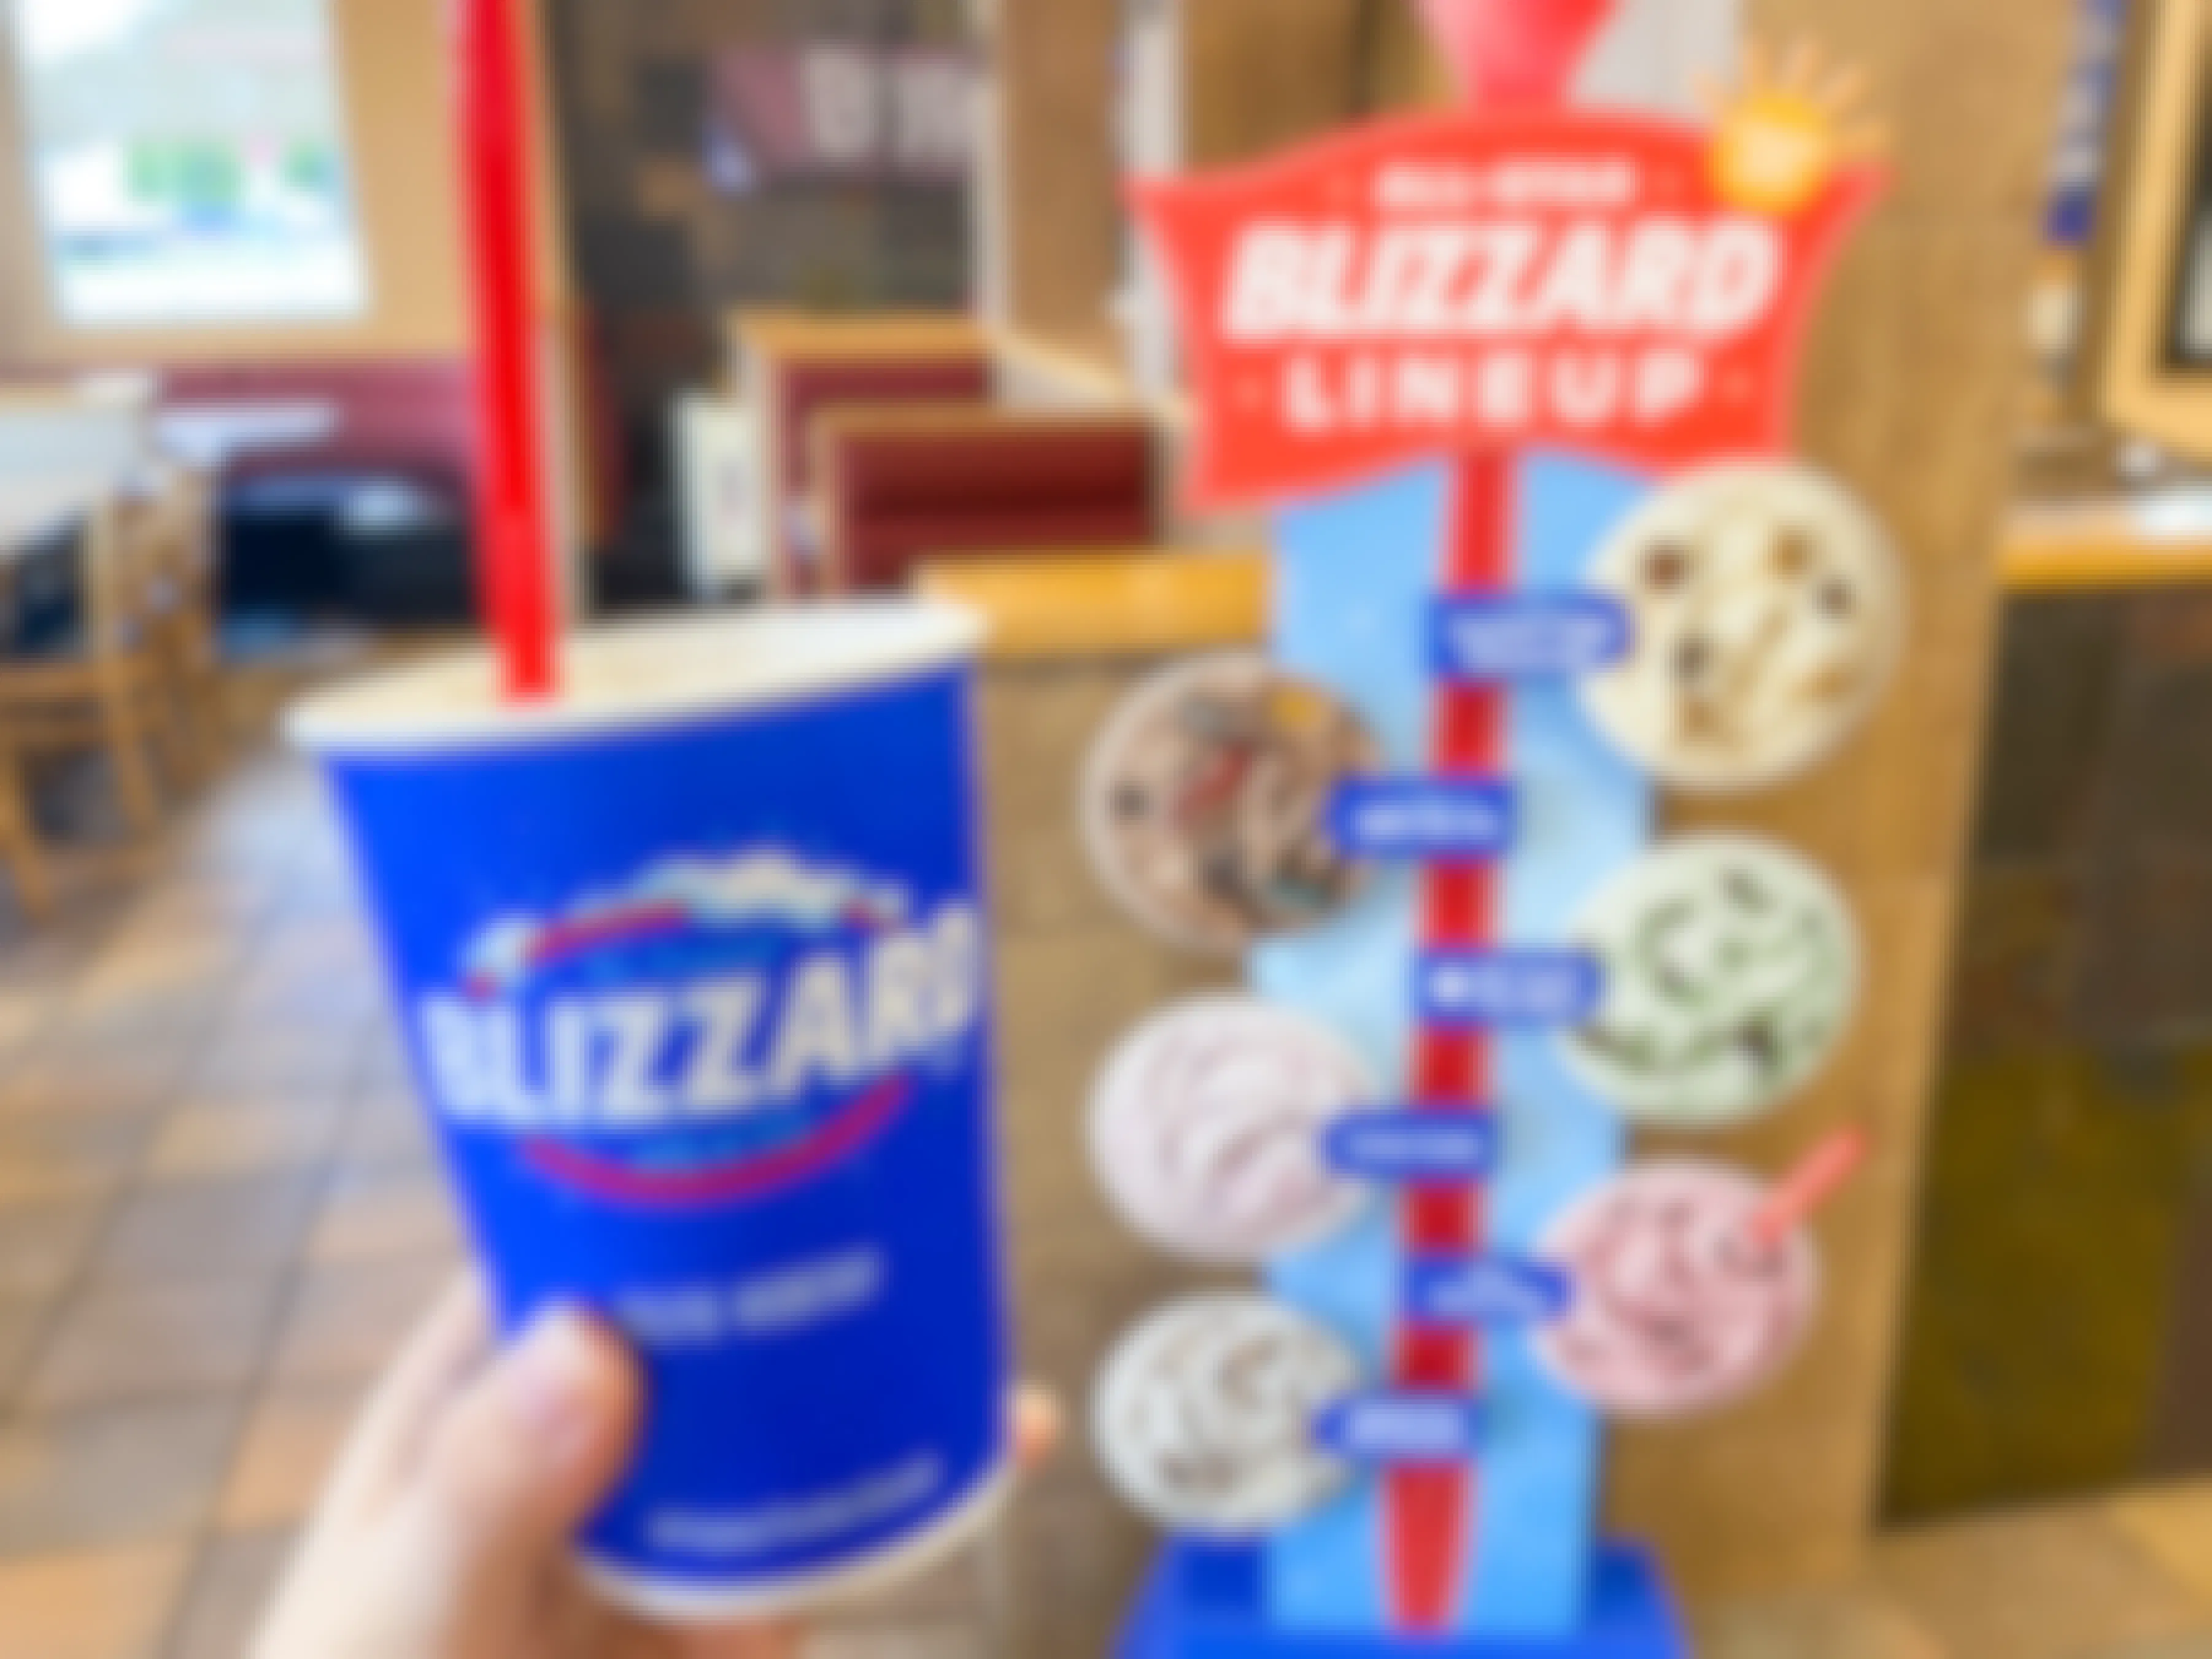 A person's hand holding up a Blizzard cup next to the All-Star Blizzard Lineup cardboard cutout displayed inside Dairy Queen.